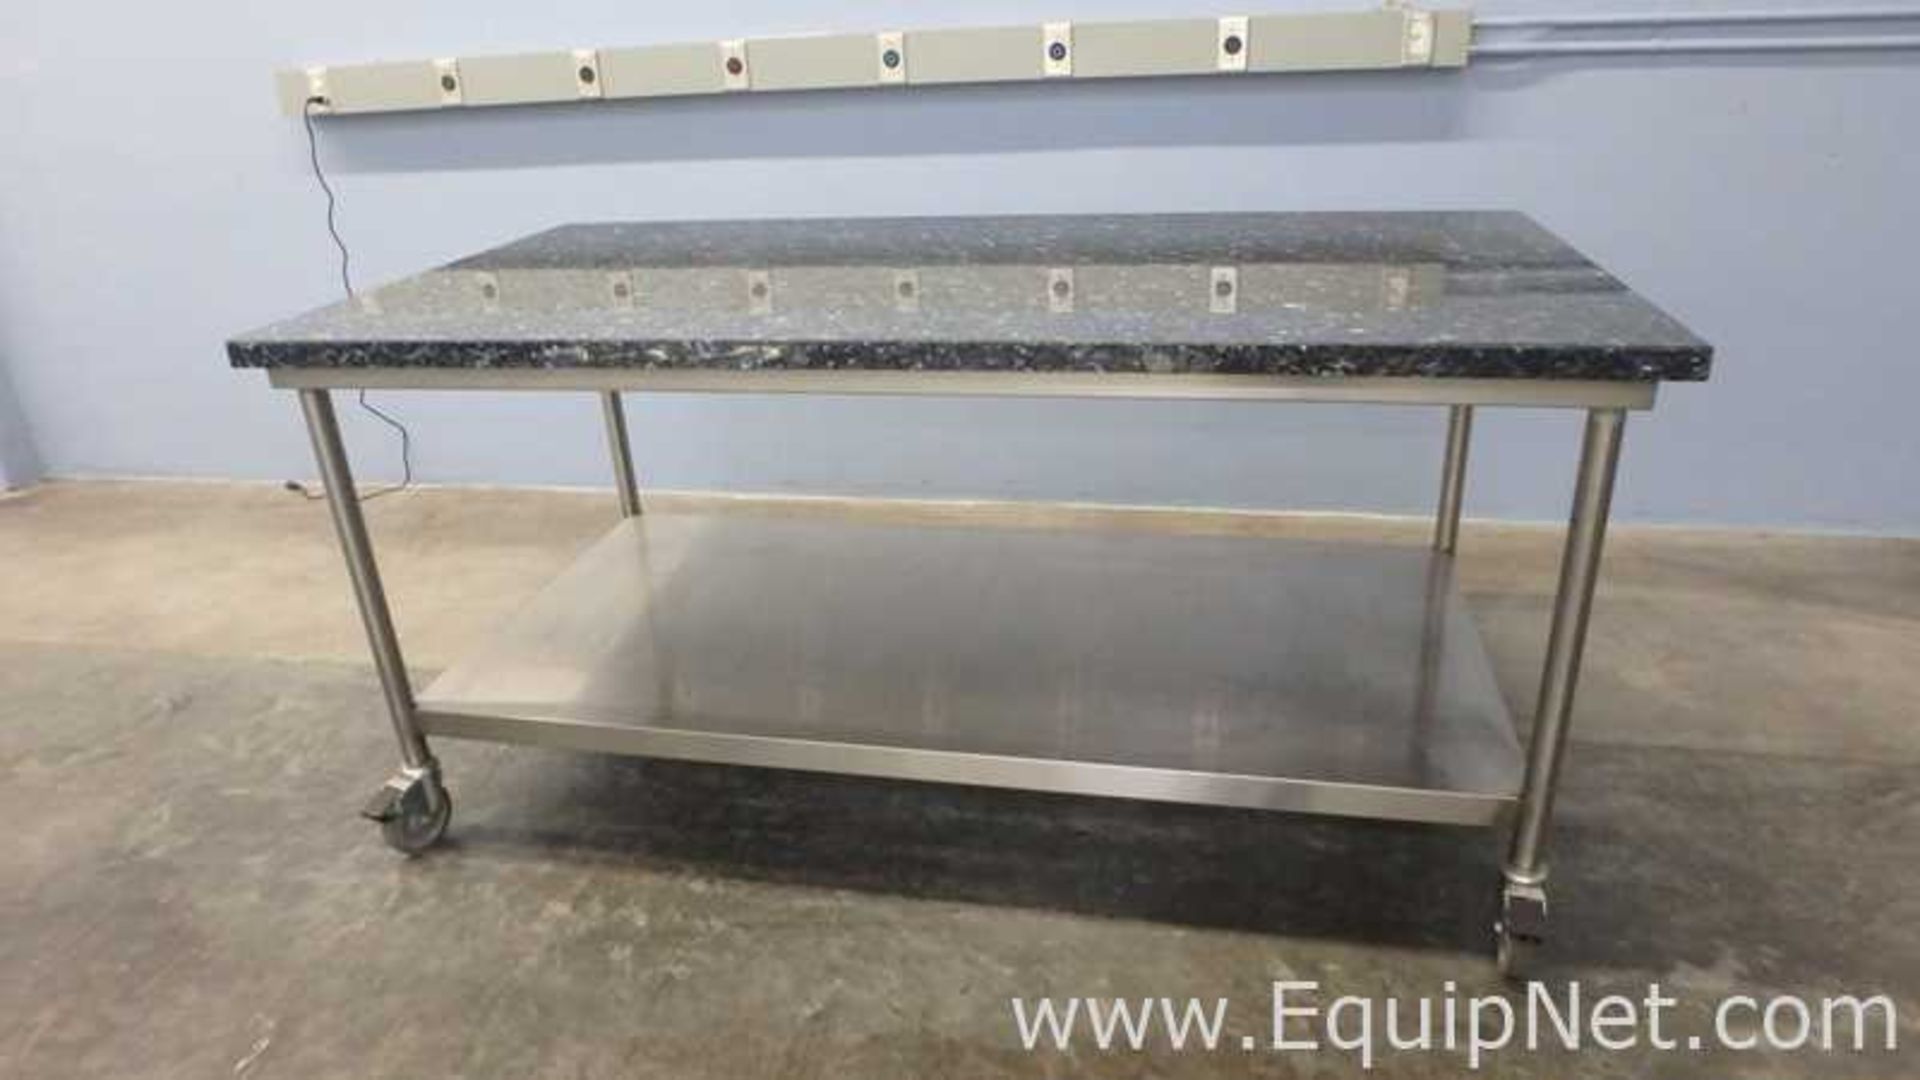 Lot of 3 Granite Top Stainless Steel Work Tables 75in x 39in - Image 2 of 9